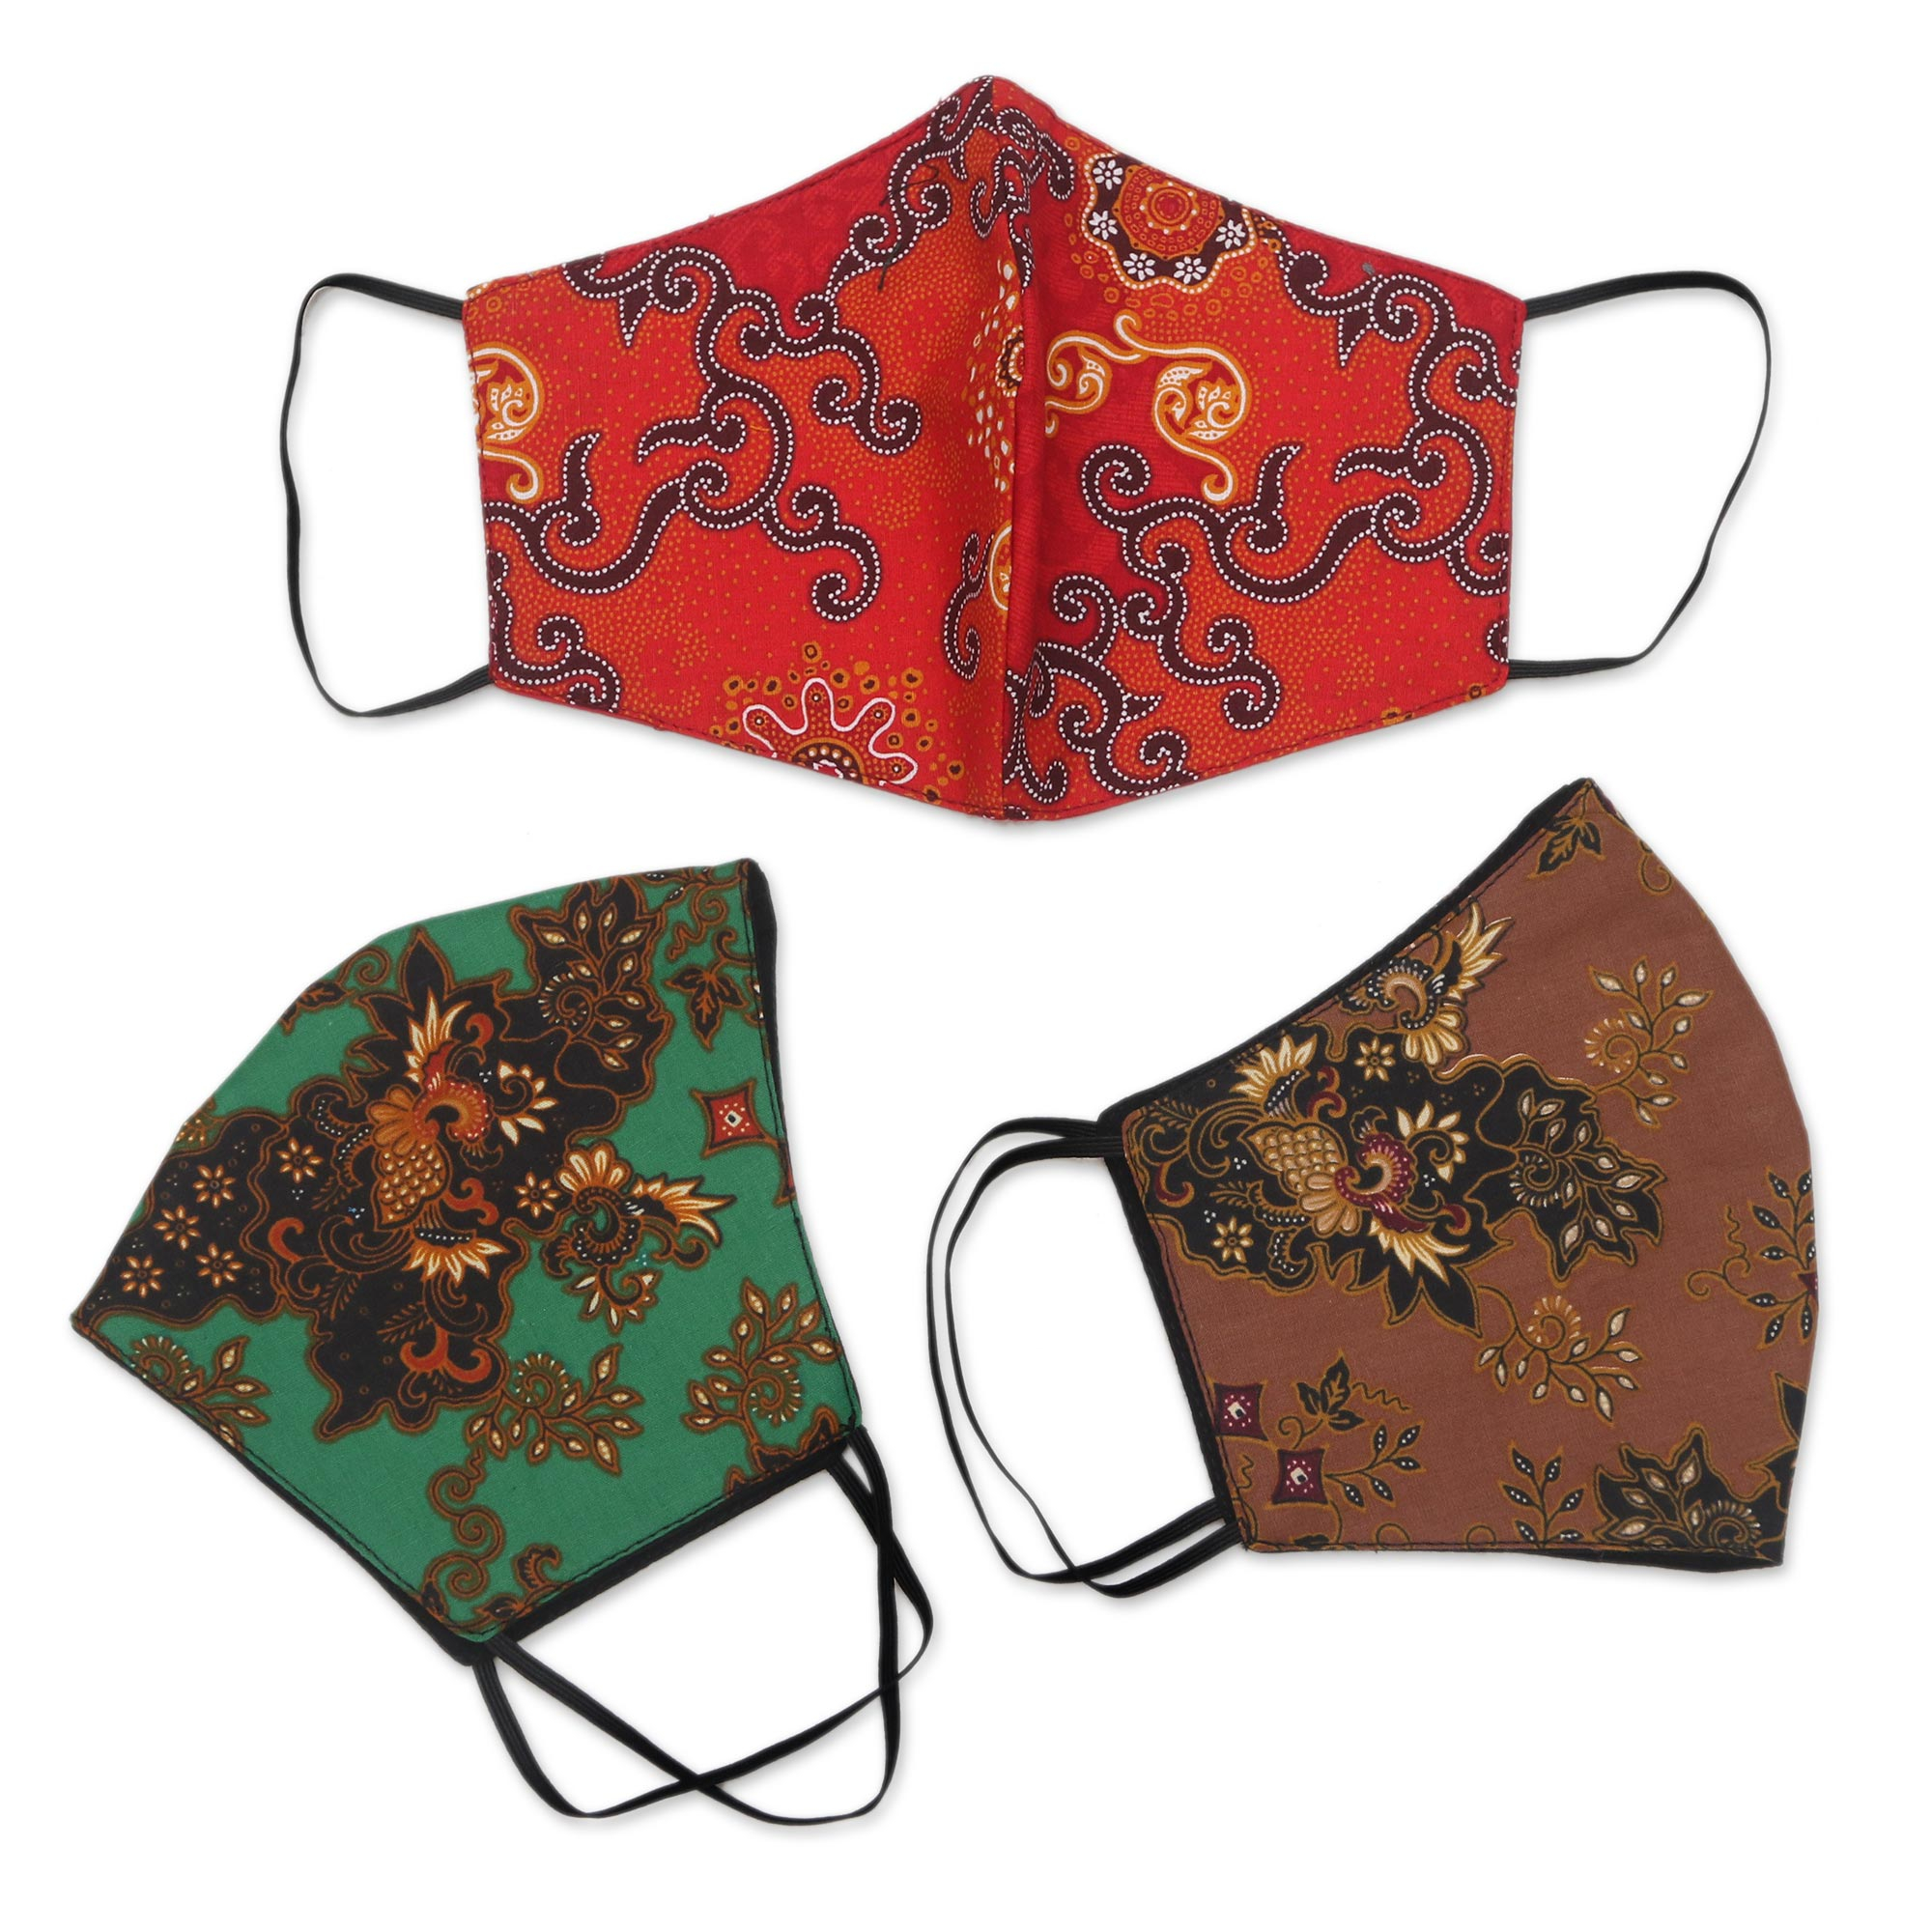 UNICEF Market | 1 Red-1 Green-1 Sepia-2-Layer Contoured Cotton Masks ...